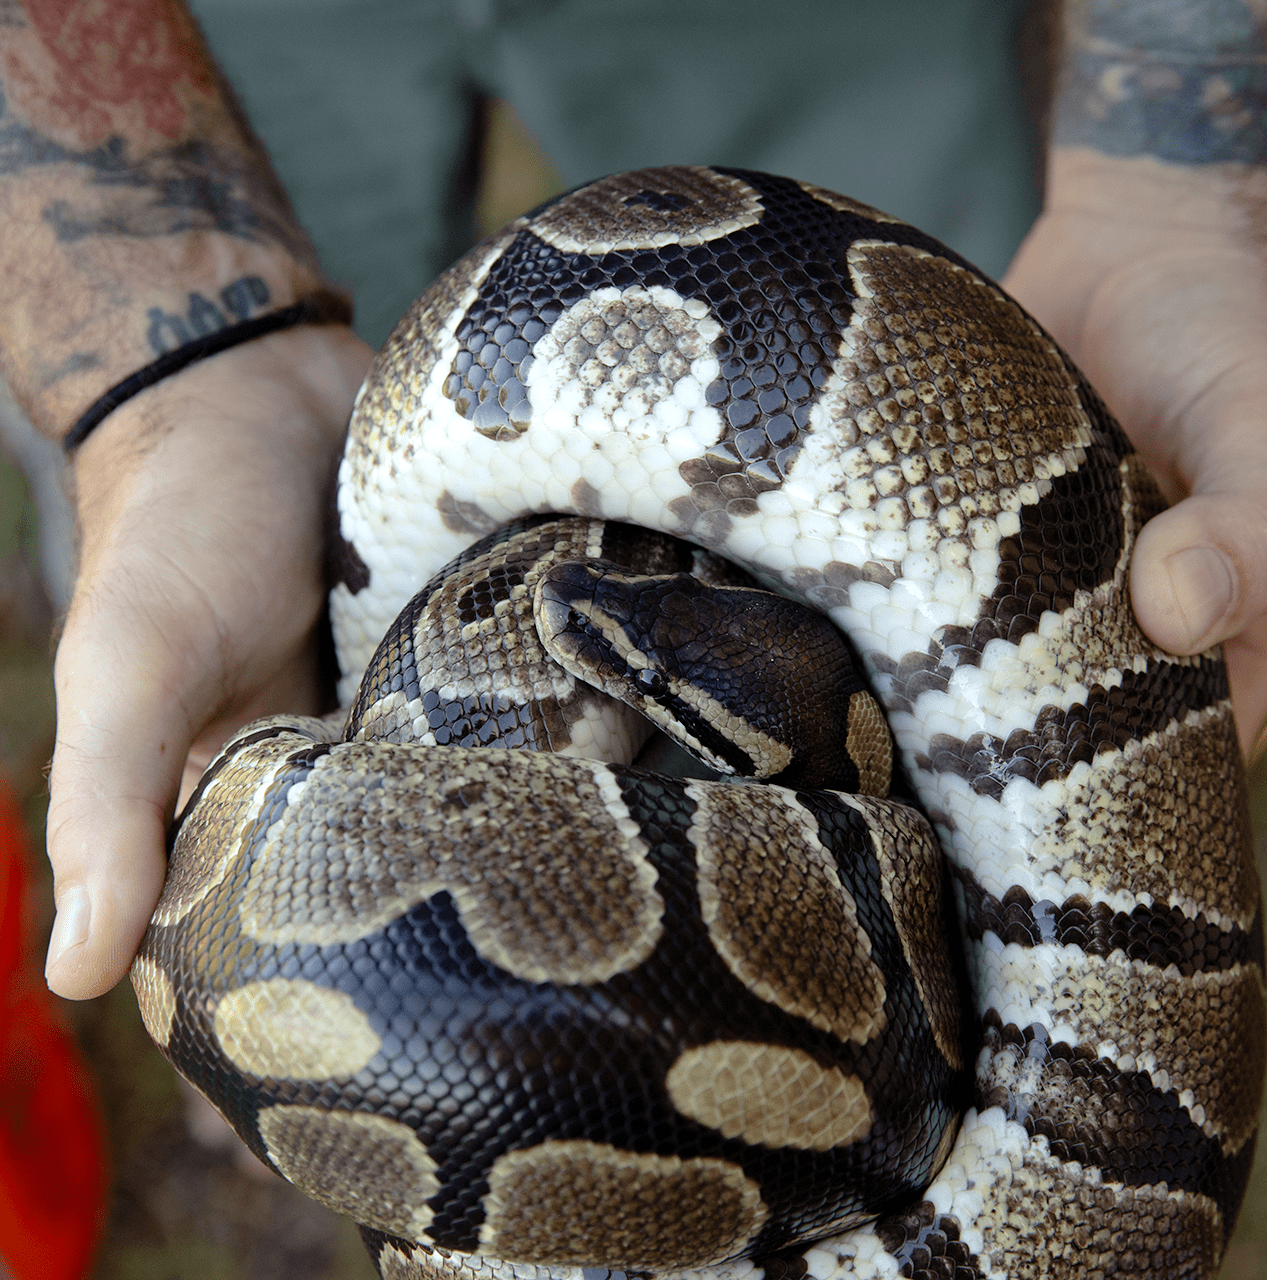 Massive invasive snakes are on the loose and spreading in Puerto Rico